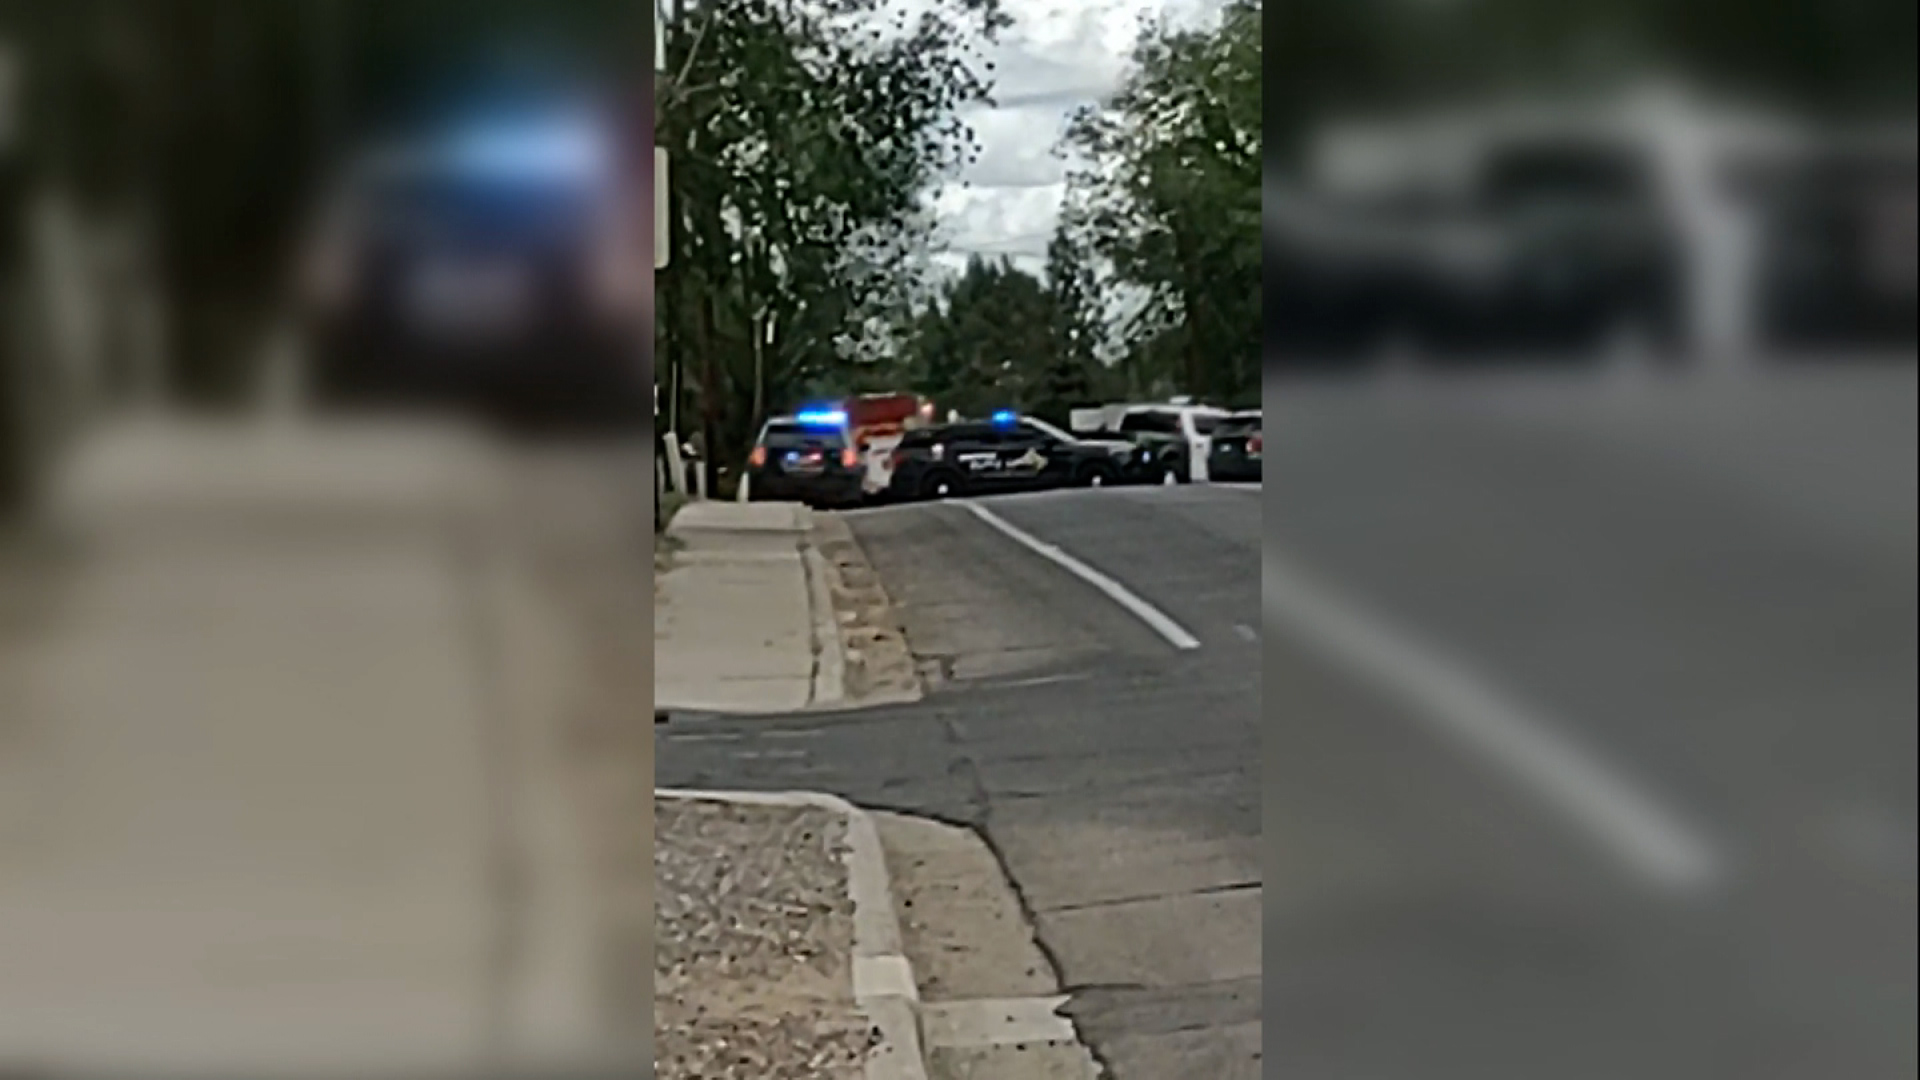 A video recorded by Facebook user Larry Jacquez shows the police response following the shooting in...